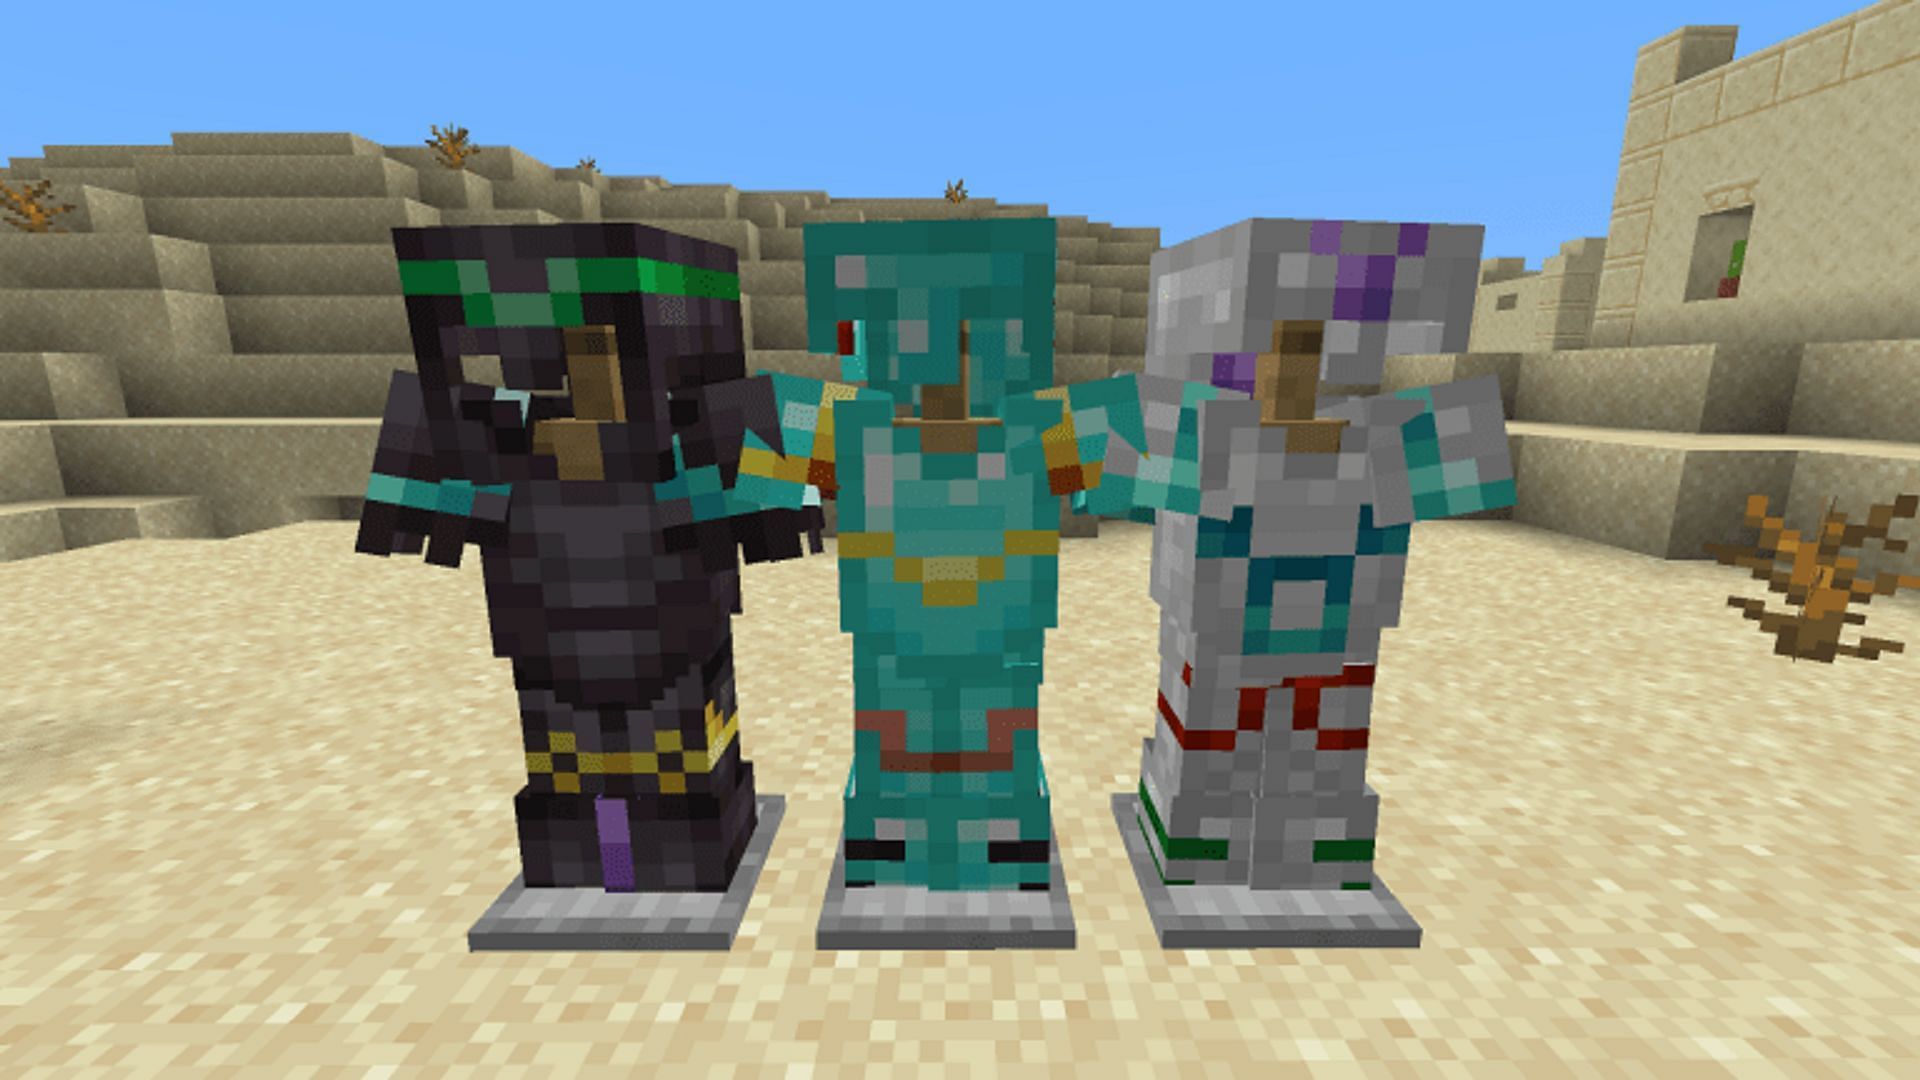 Trimmed armor provides a whole new way to customize gear in Minecraft (Image via Mojang)